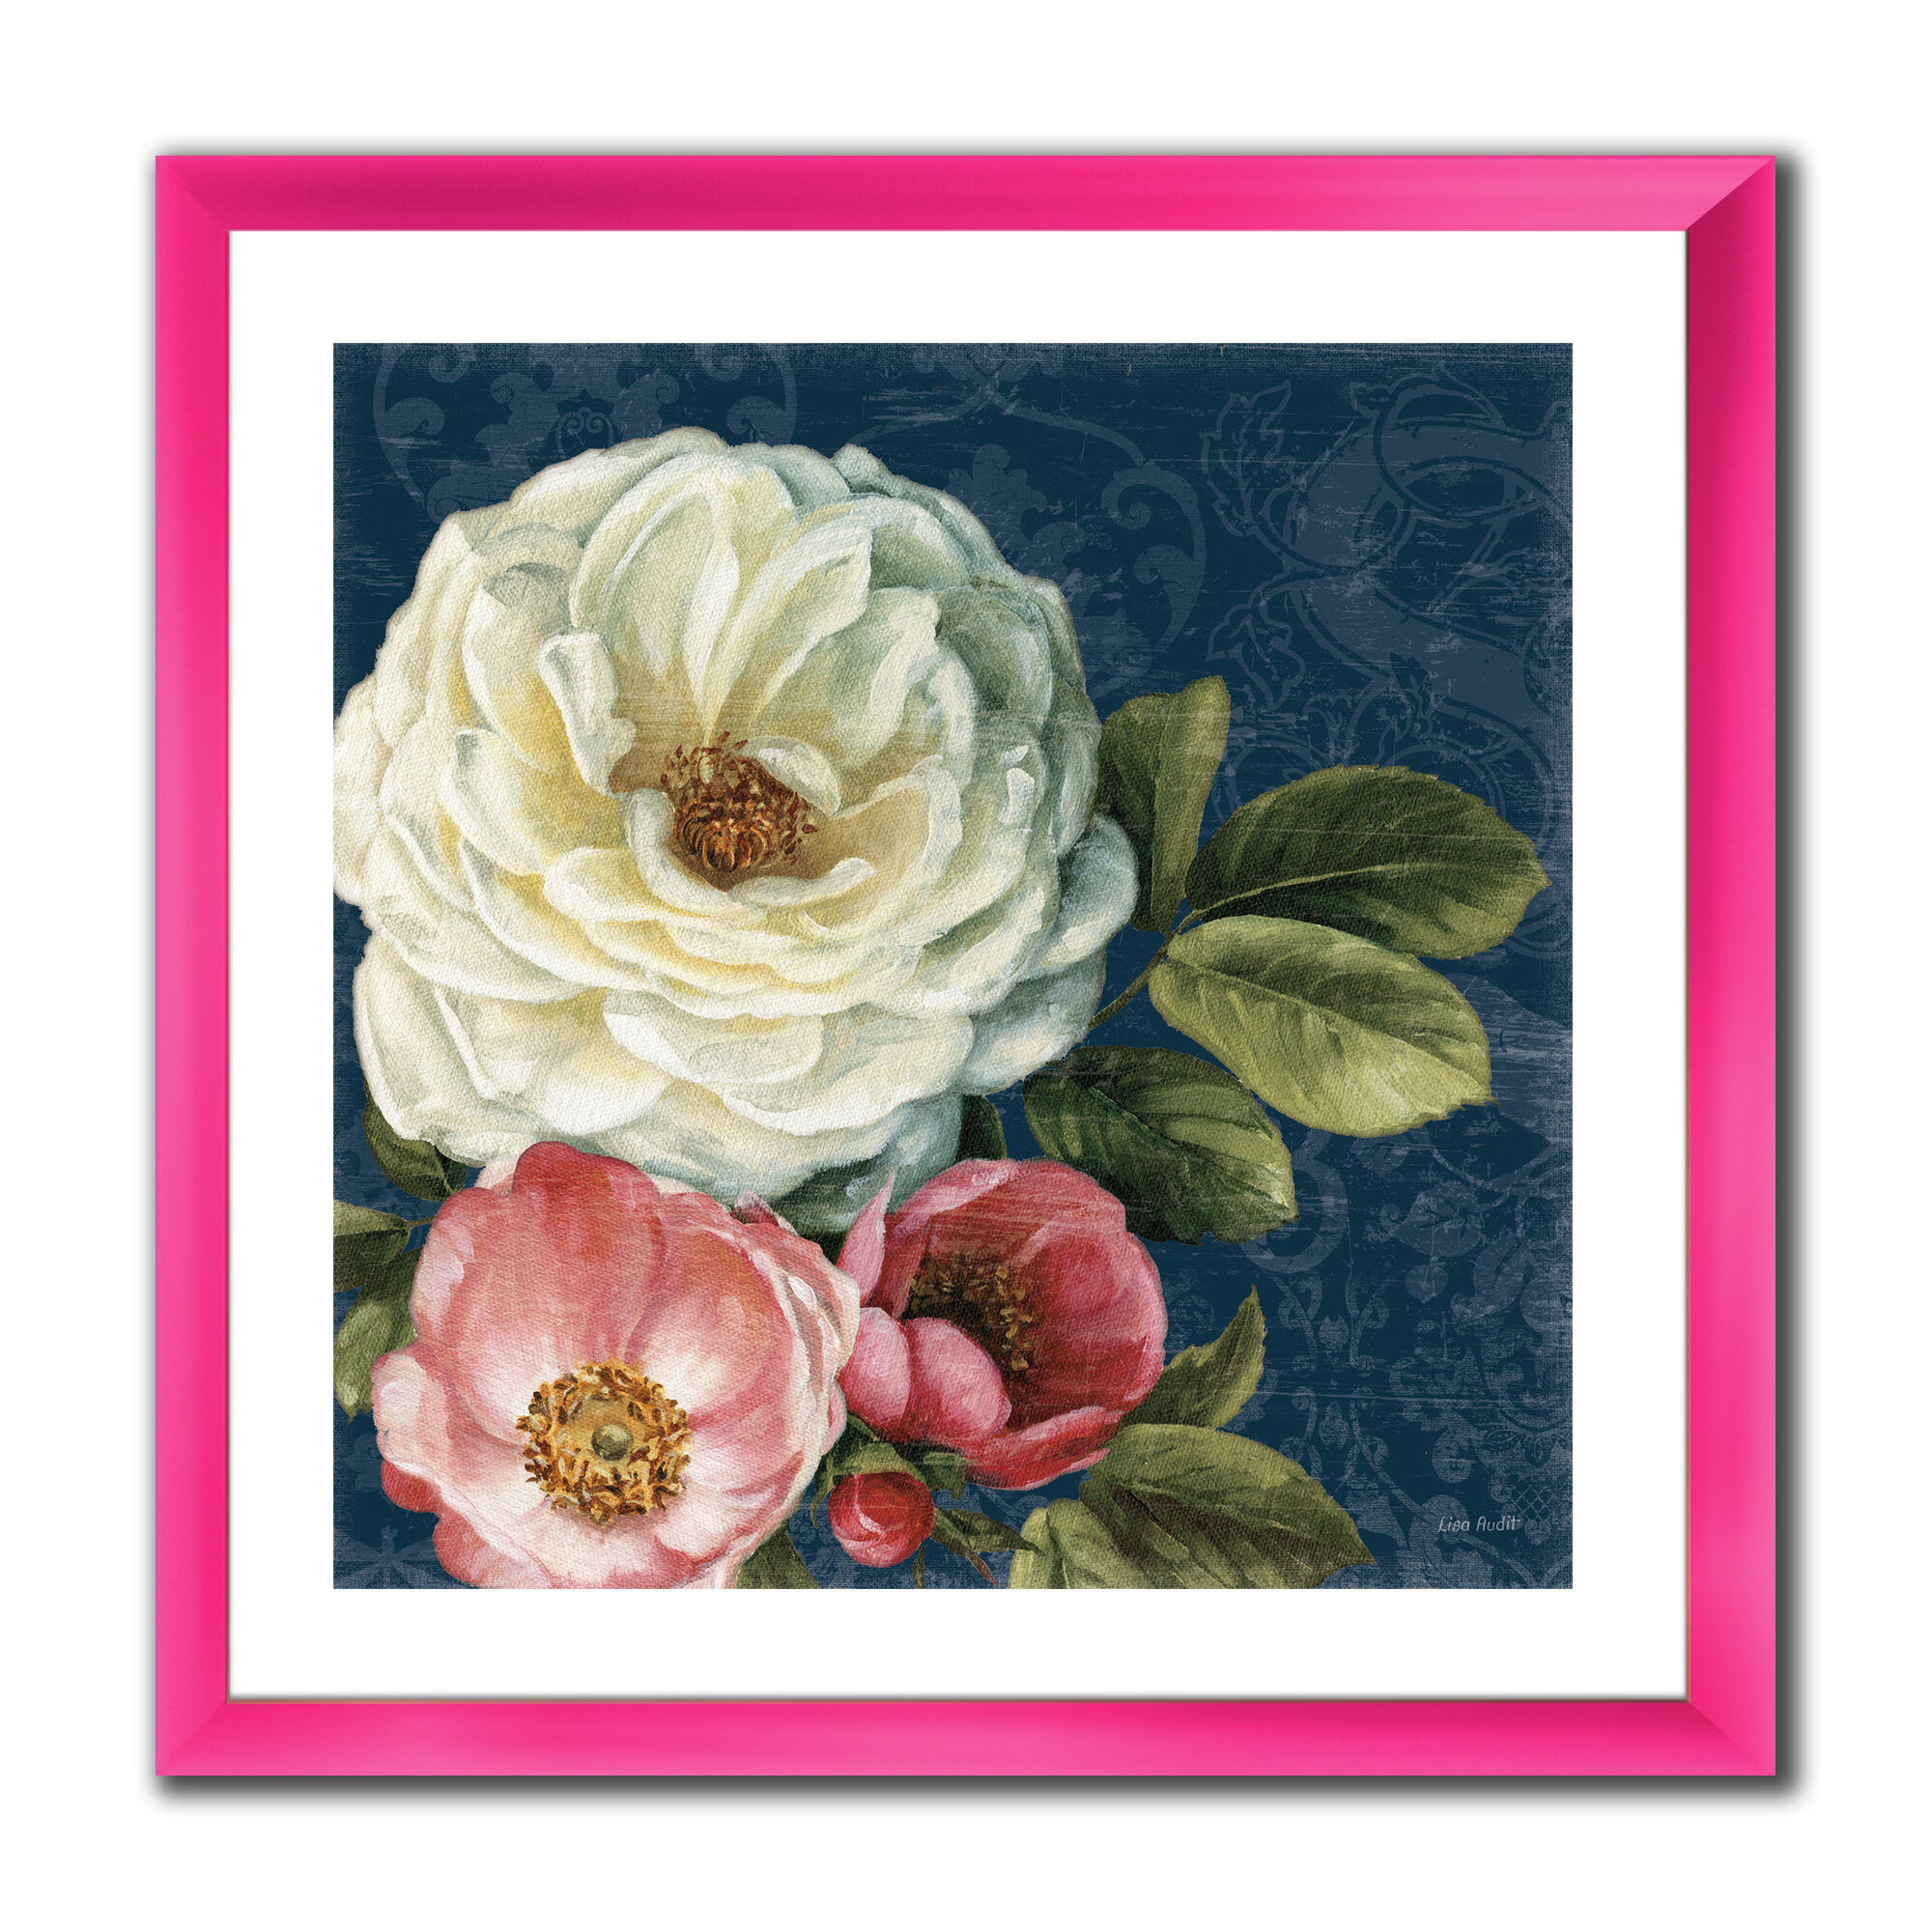 East Urban Home Red White And Pink Damask Rose Flowers Picture Frame Print On Canvas Wayfair